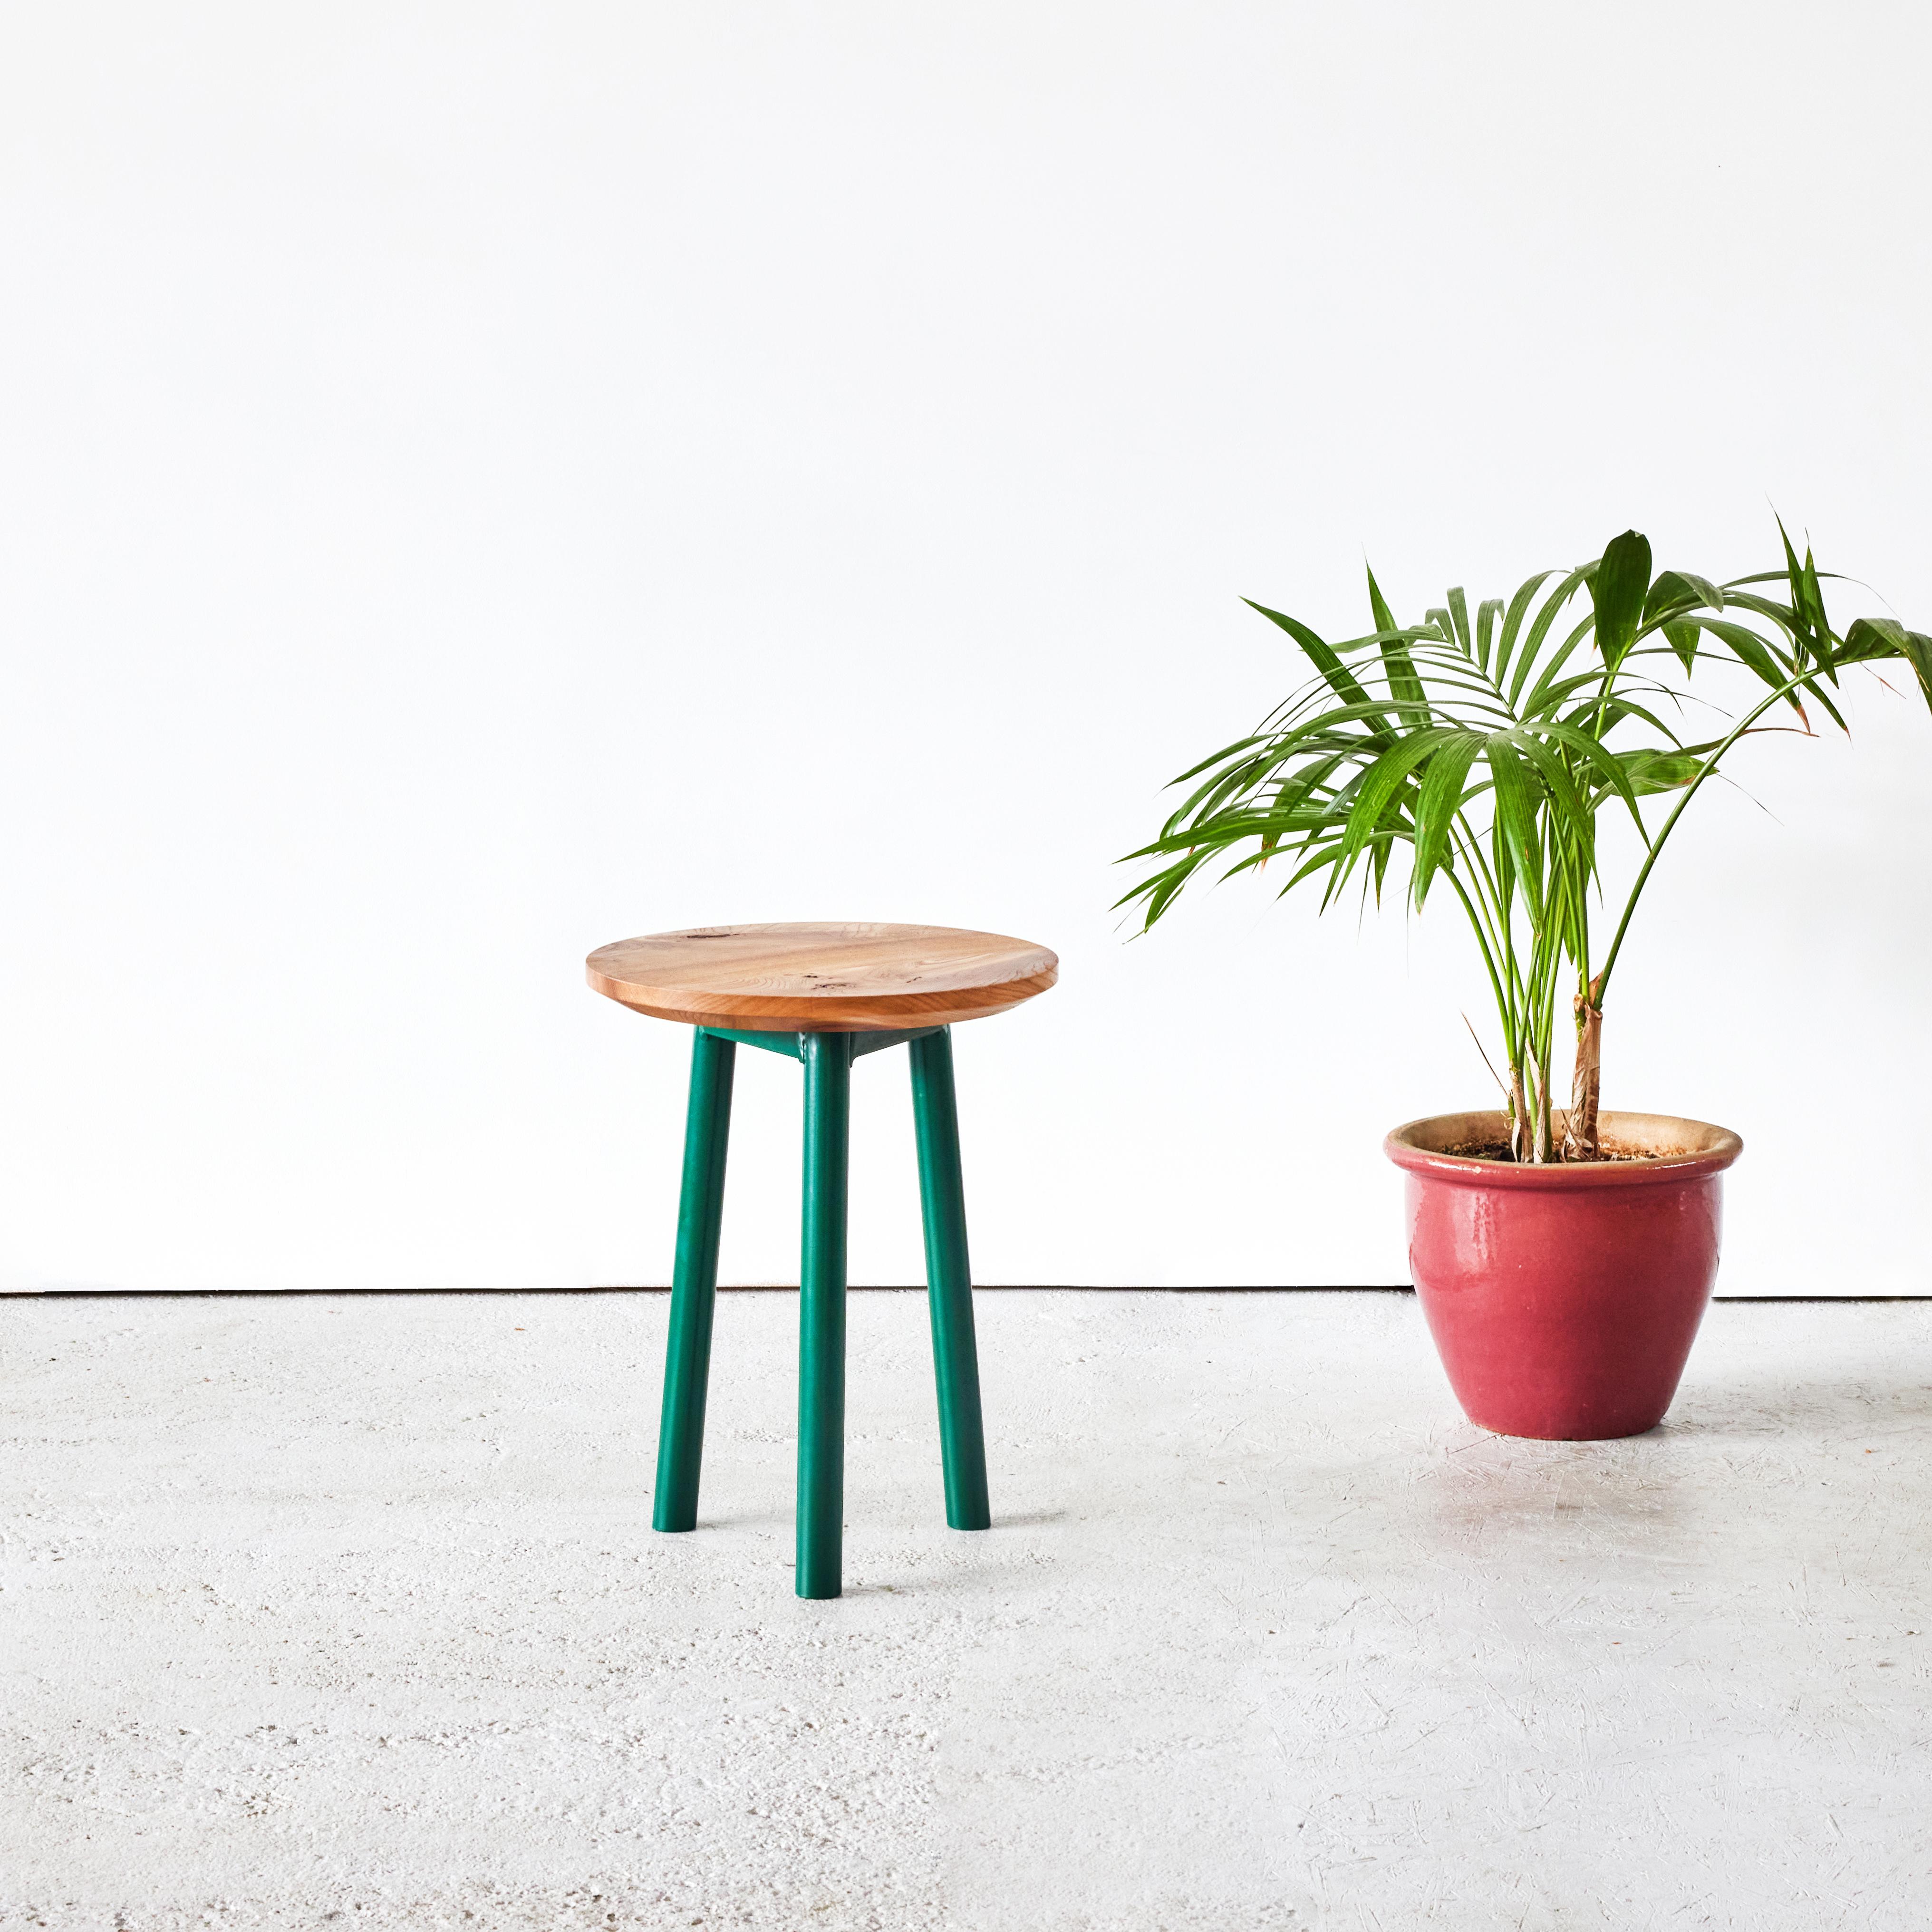 Elegant and contemporary, the Muse stool is the perfect addition for every gathering.

The stool is designed to fit perfectly with our Muse dining table, or to make a statement as a standalone piece. With its striking yet simple form, the Muse